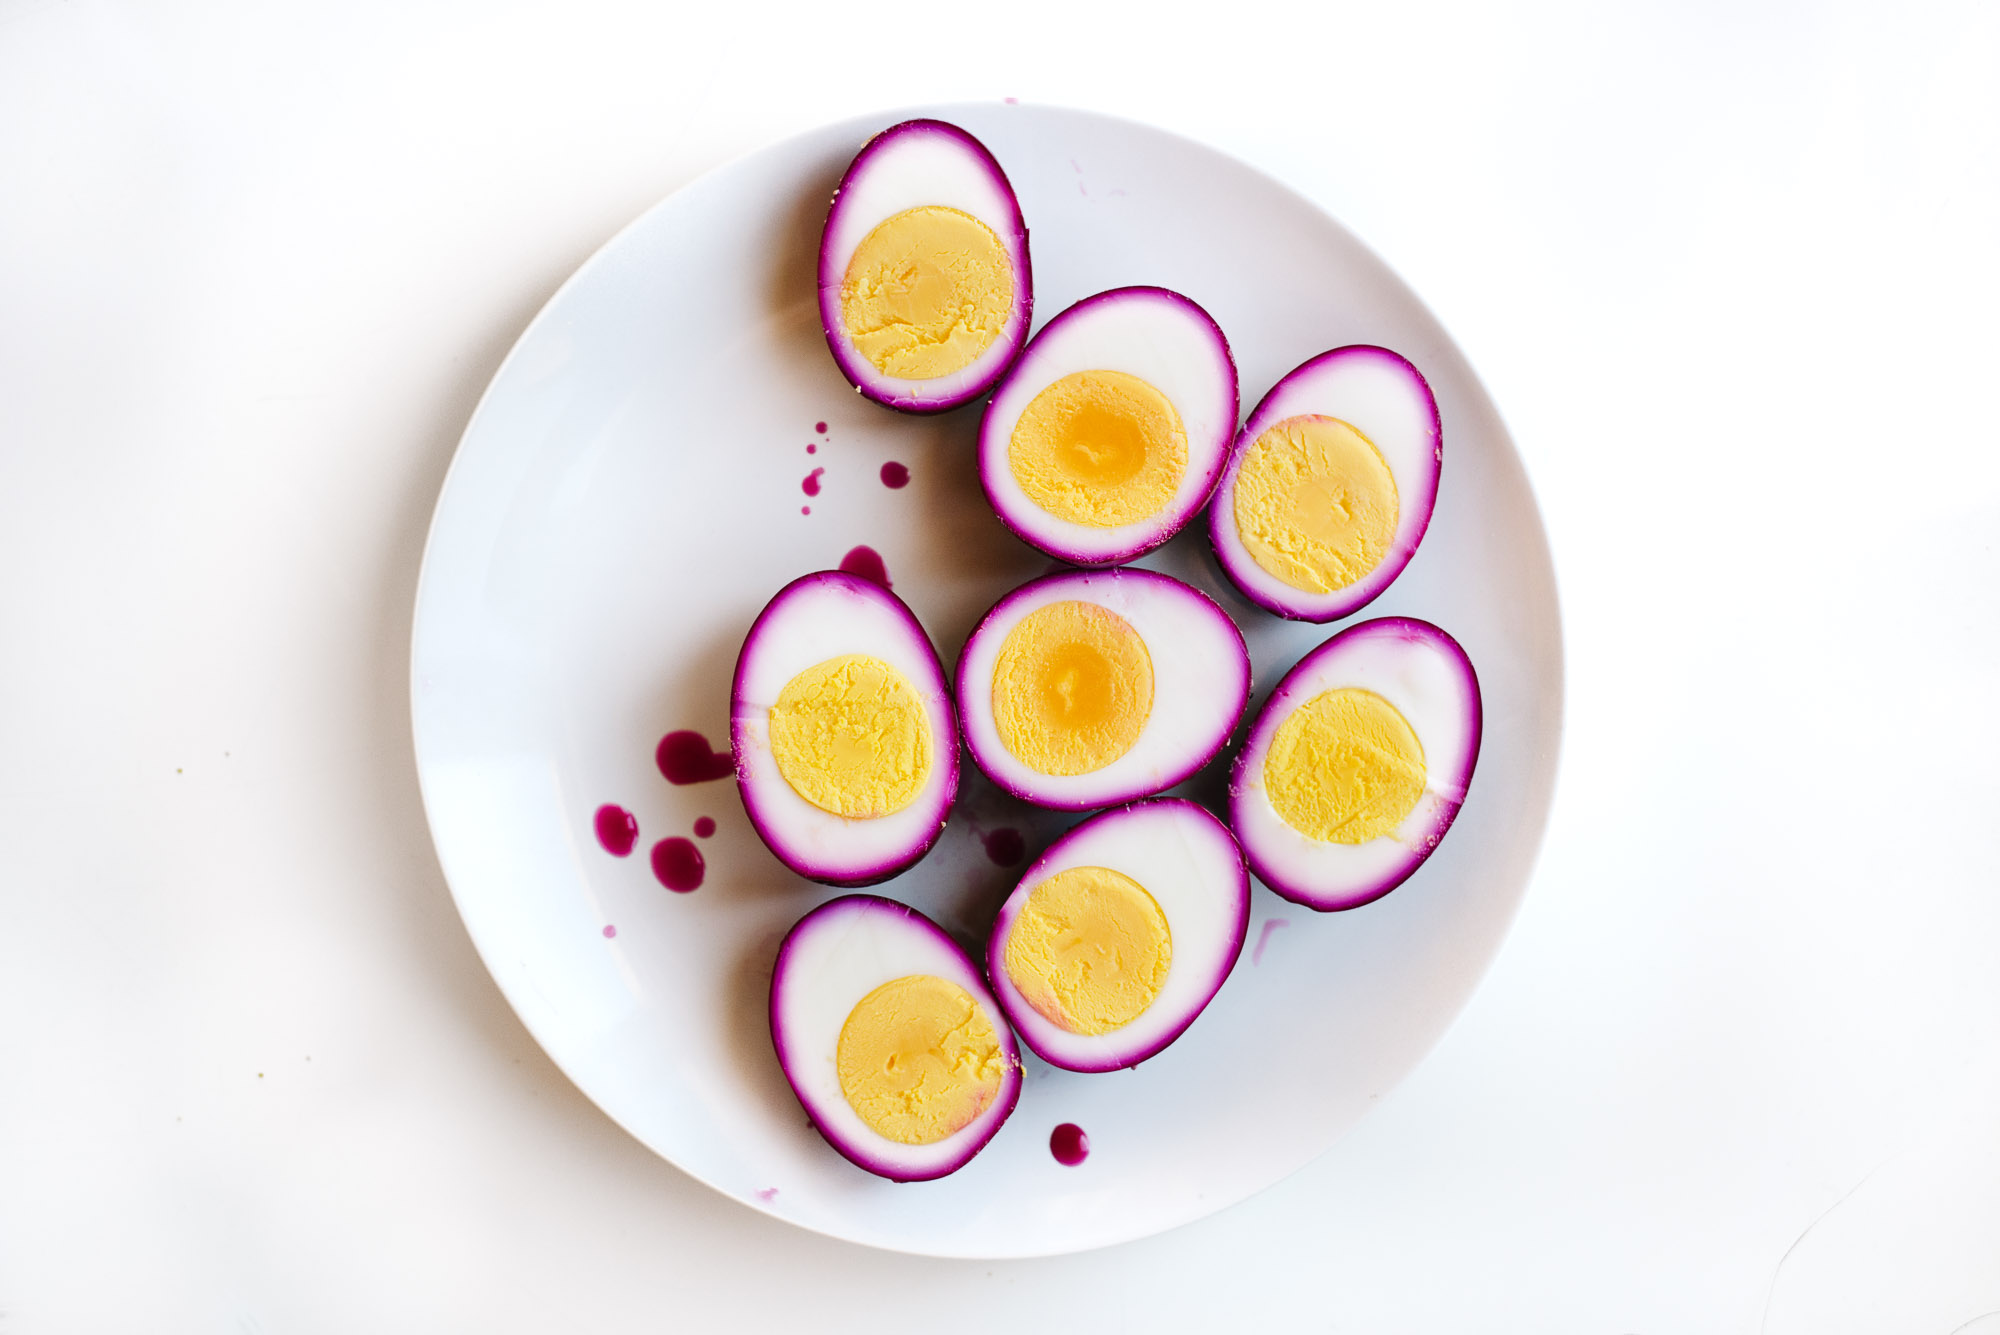 Vegetarian Passover Seder Plate with Beet-Pickled Deviled Eggs